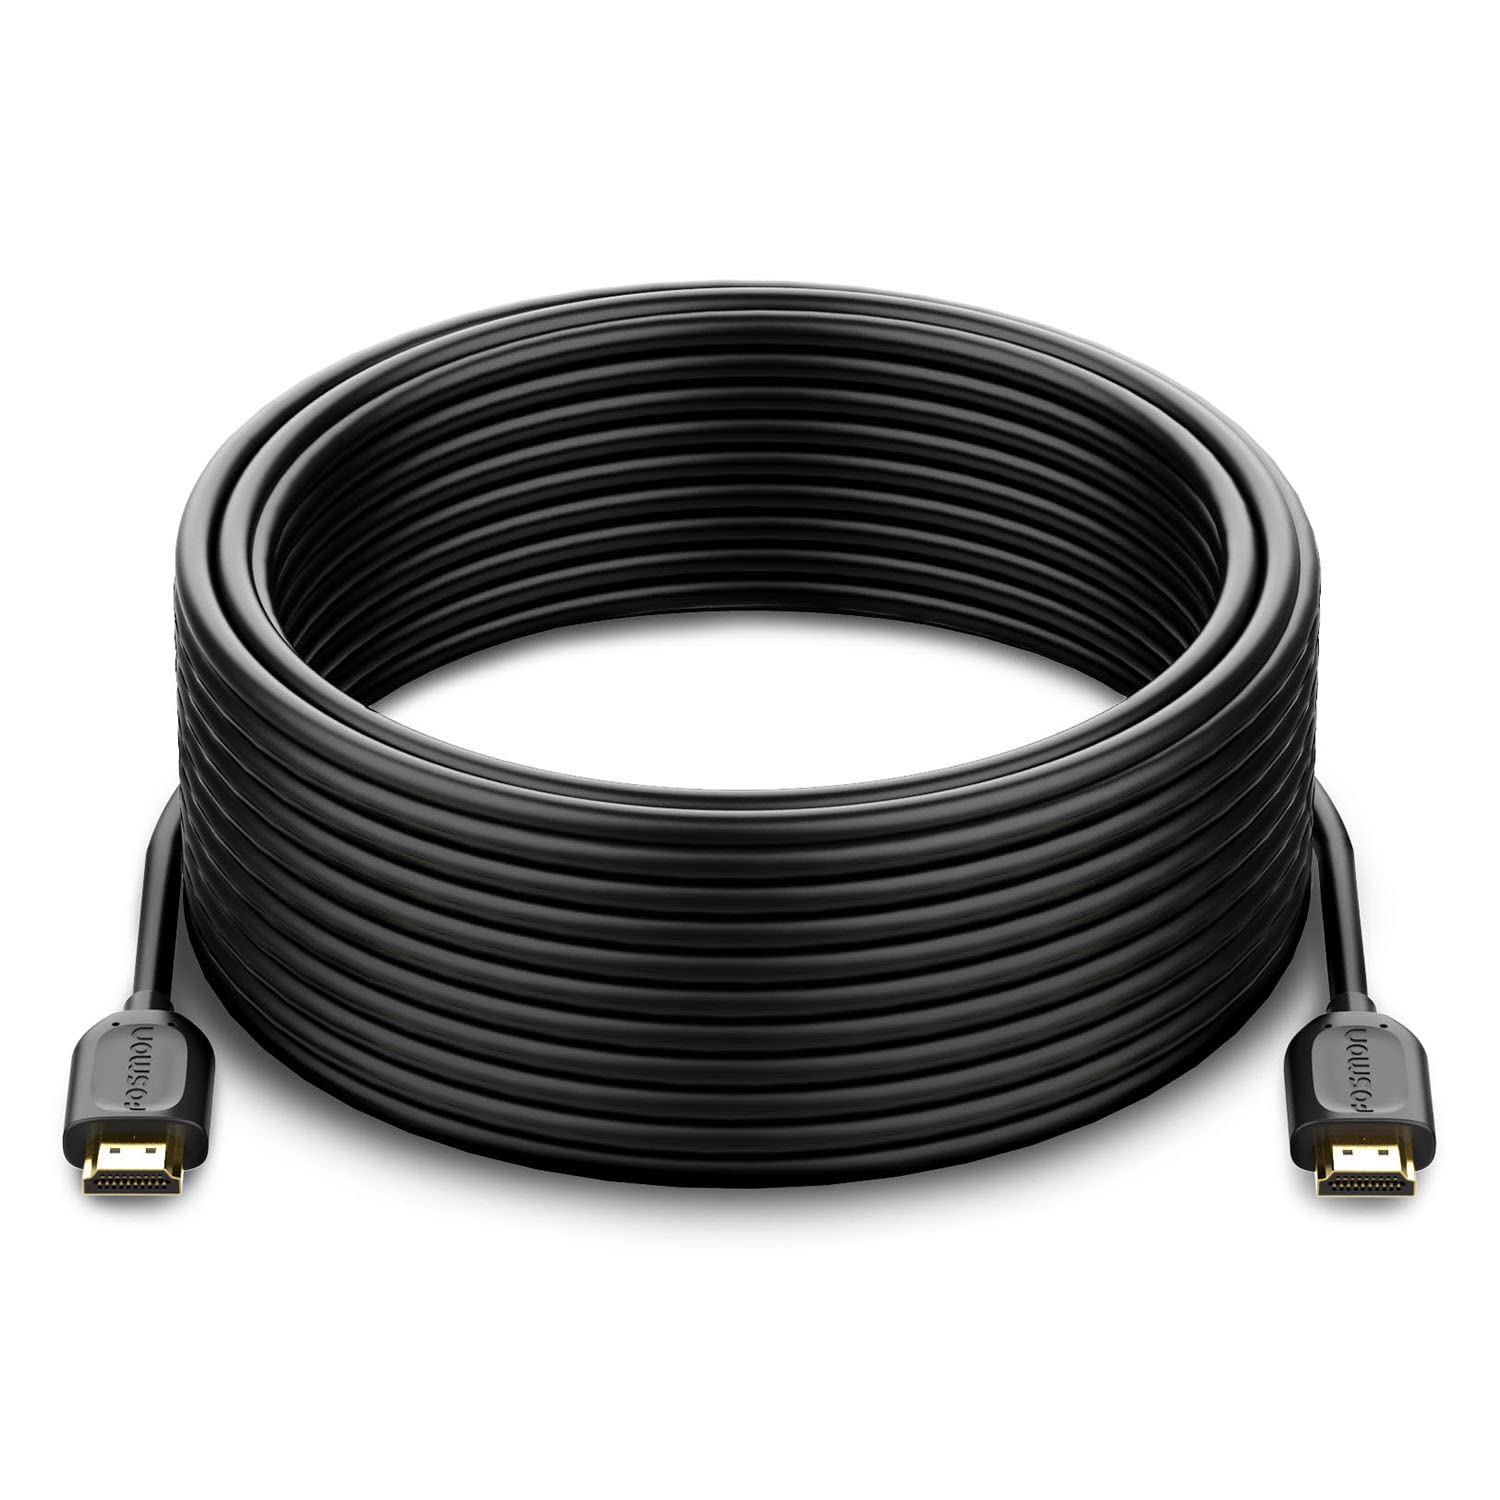 Fosmon 4K HDMI Cable 50 Feet, Gold-Plated Ultra High [...]